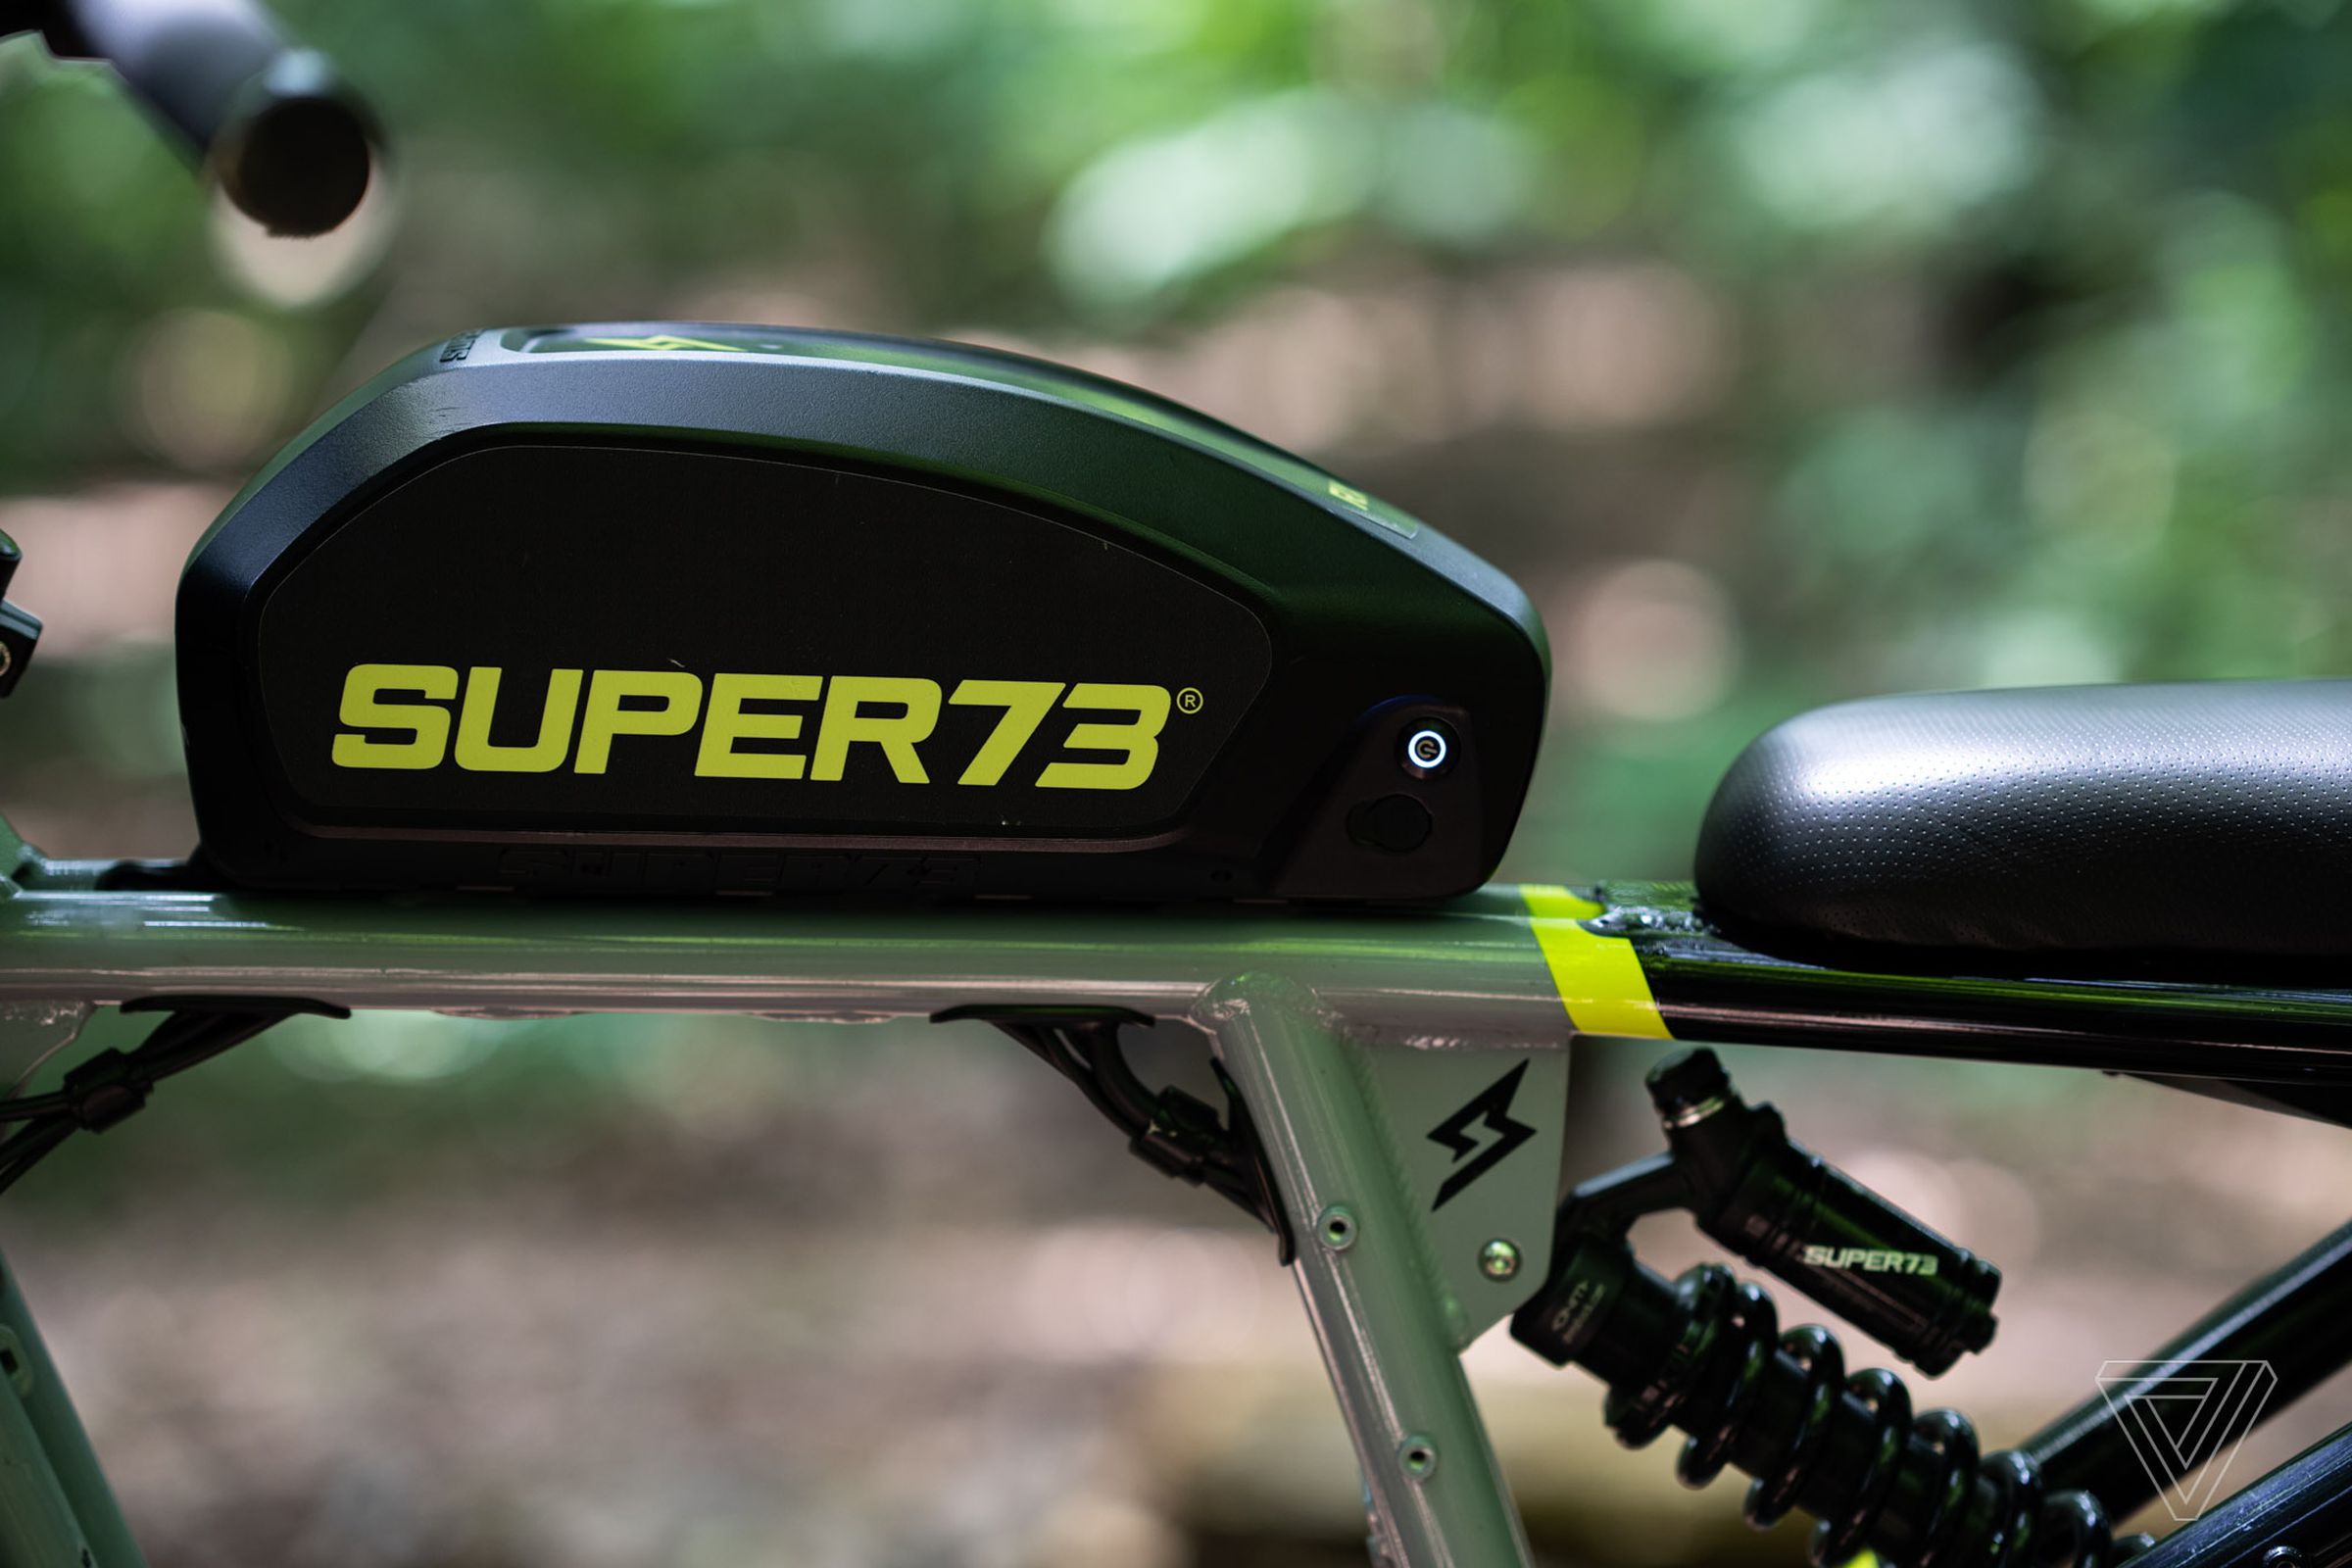 Super73’s RX comes with a 5V 2.8lb charger that is capable of charging the 960Wh battery in three to four hours.